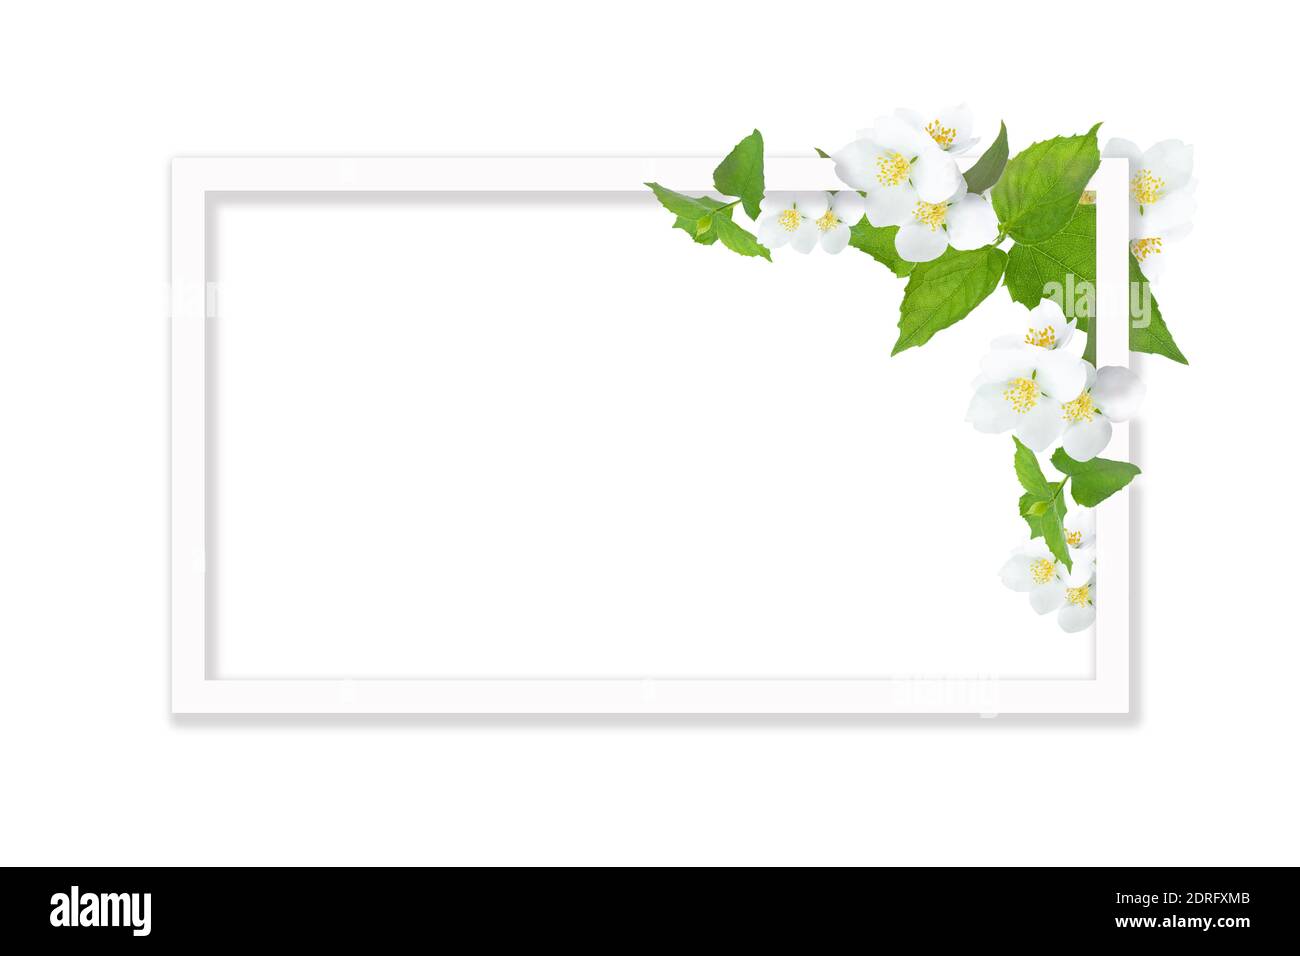 White frame with place for text on a white background with jasmine flowers and green leaves. Greeting cards, template, celebration concept Stock Photo